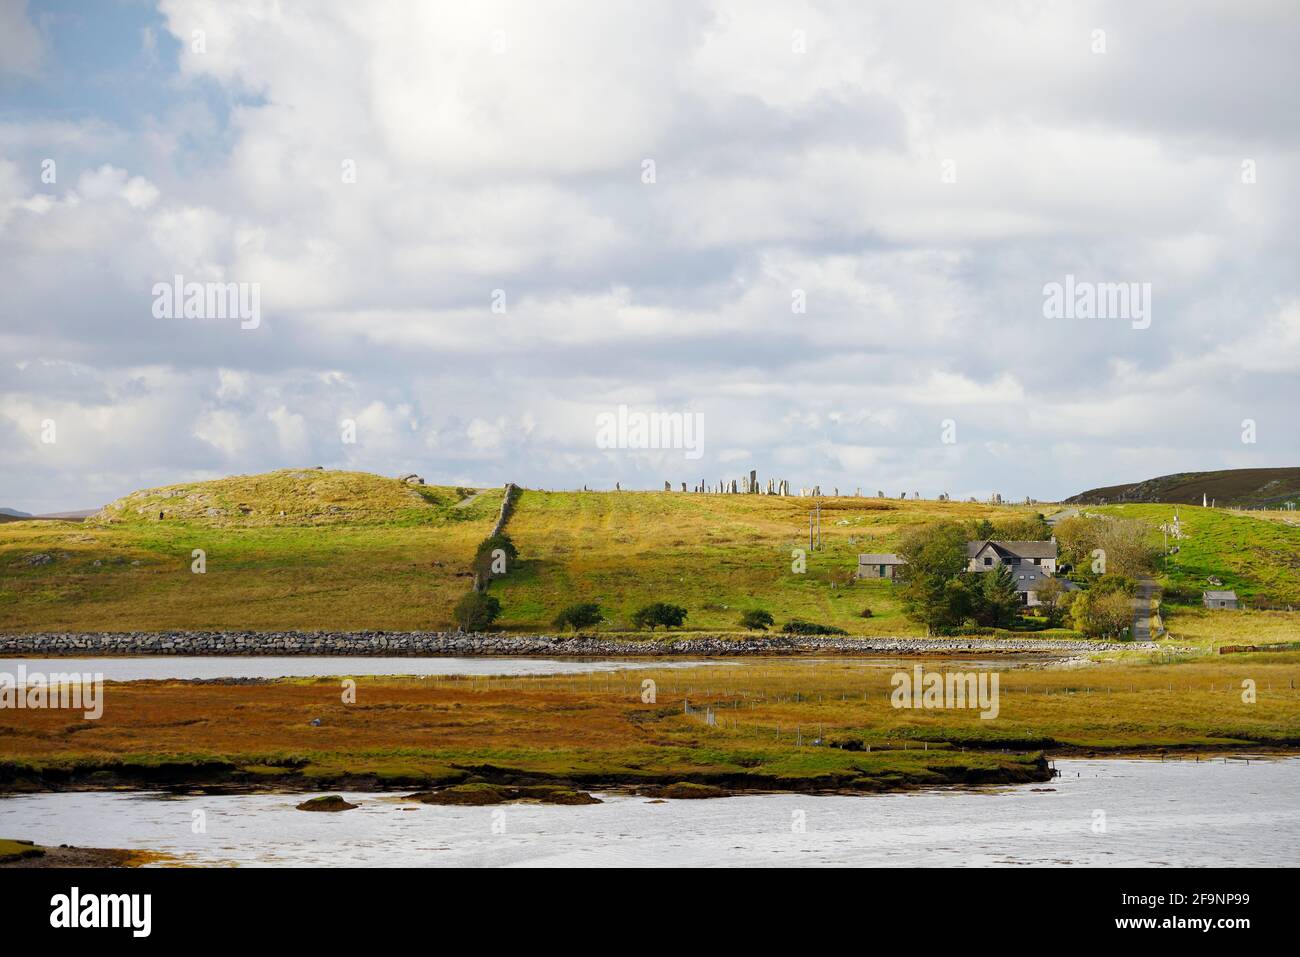 Tursachan prehistoric stones at Callanish, Lewis, Scotland aka Callanish I. View from east showing stones sited on spine of crag and tail landform Stock Photo